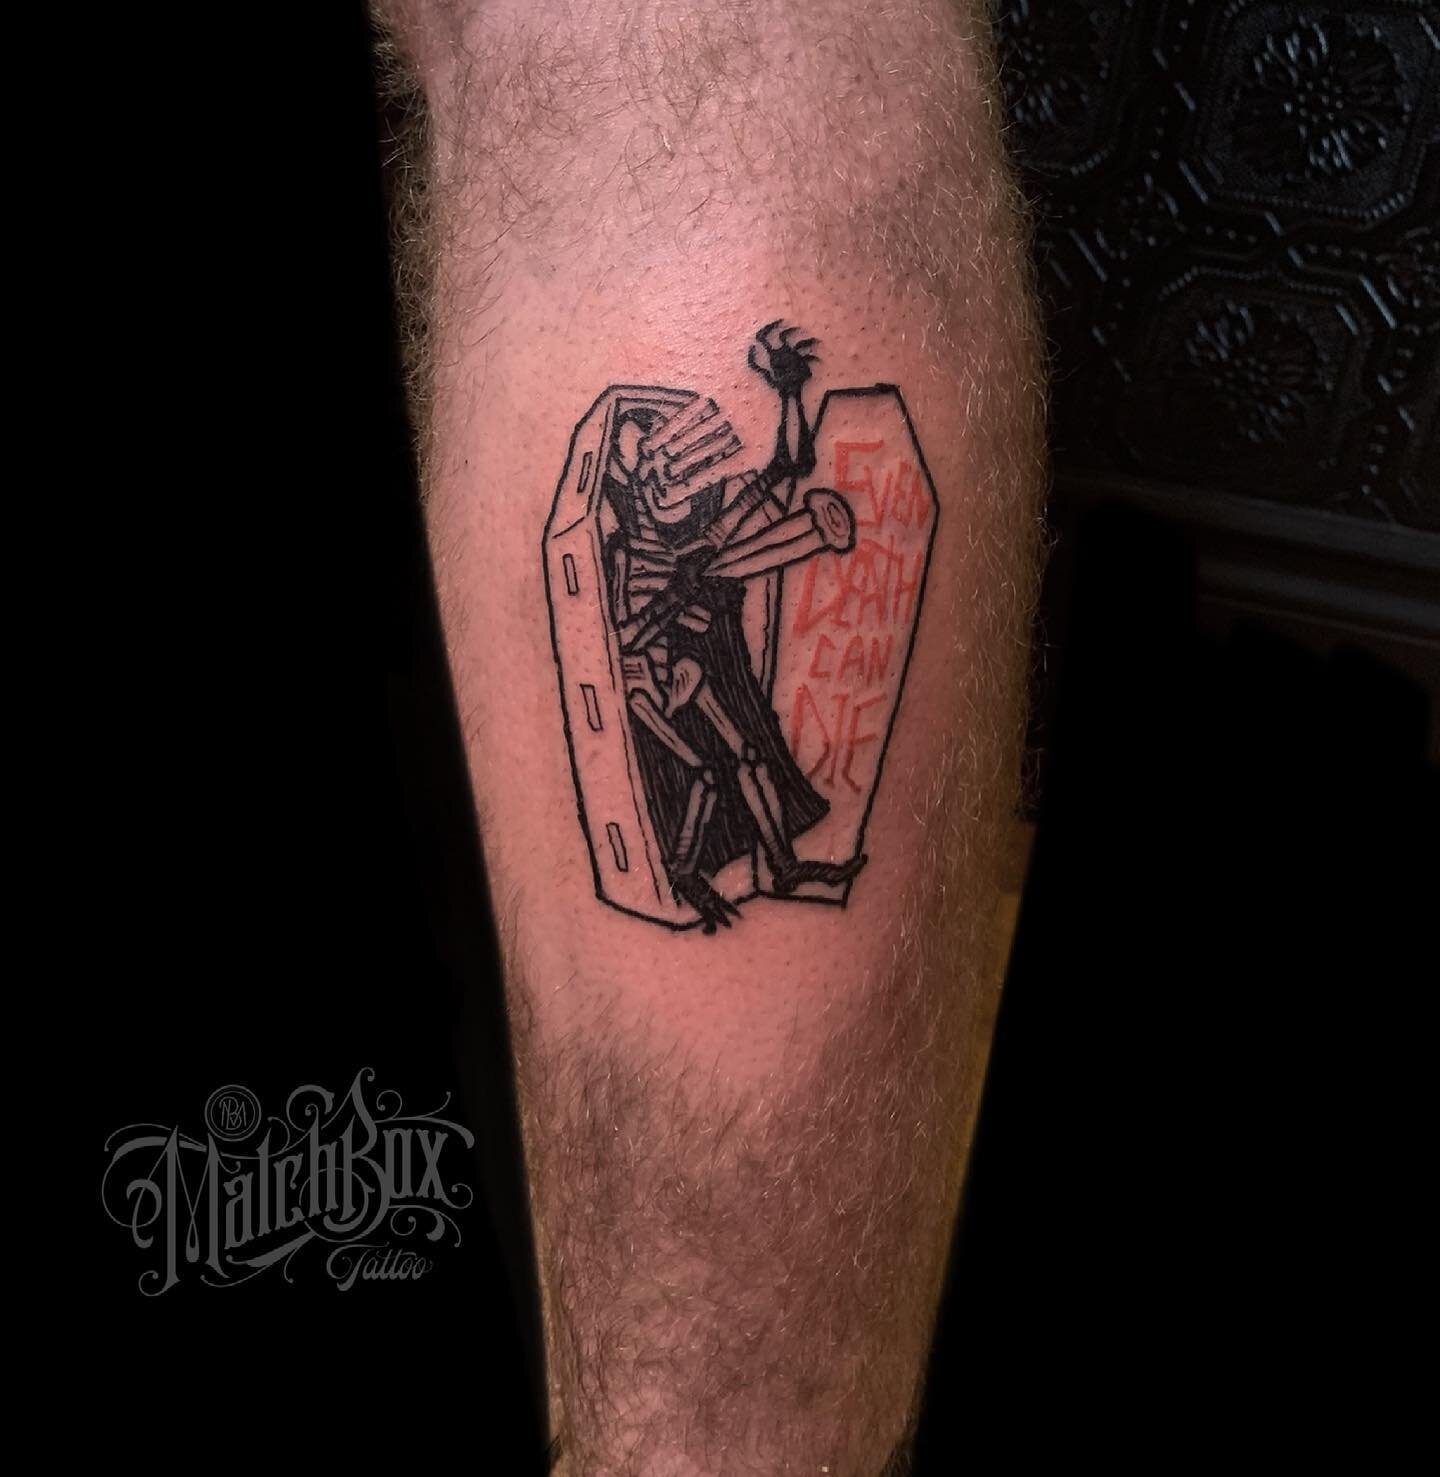 Even Death Can Die by @inkbykoko 

.
.
.
#toronto #torontotattoo #torontotattooartist #torontotattooshop #dundaswest #queenwest #matchboxtattoo #ink #girlswithtattoos #guyswithtattoos #follow #like #matchboxtattoo #covid #covid_19